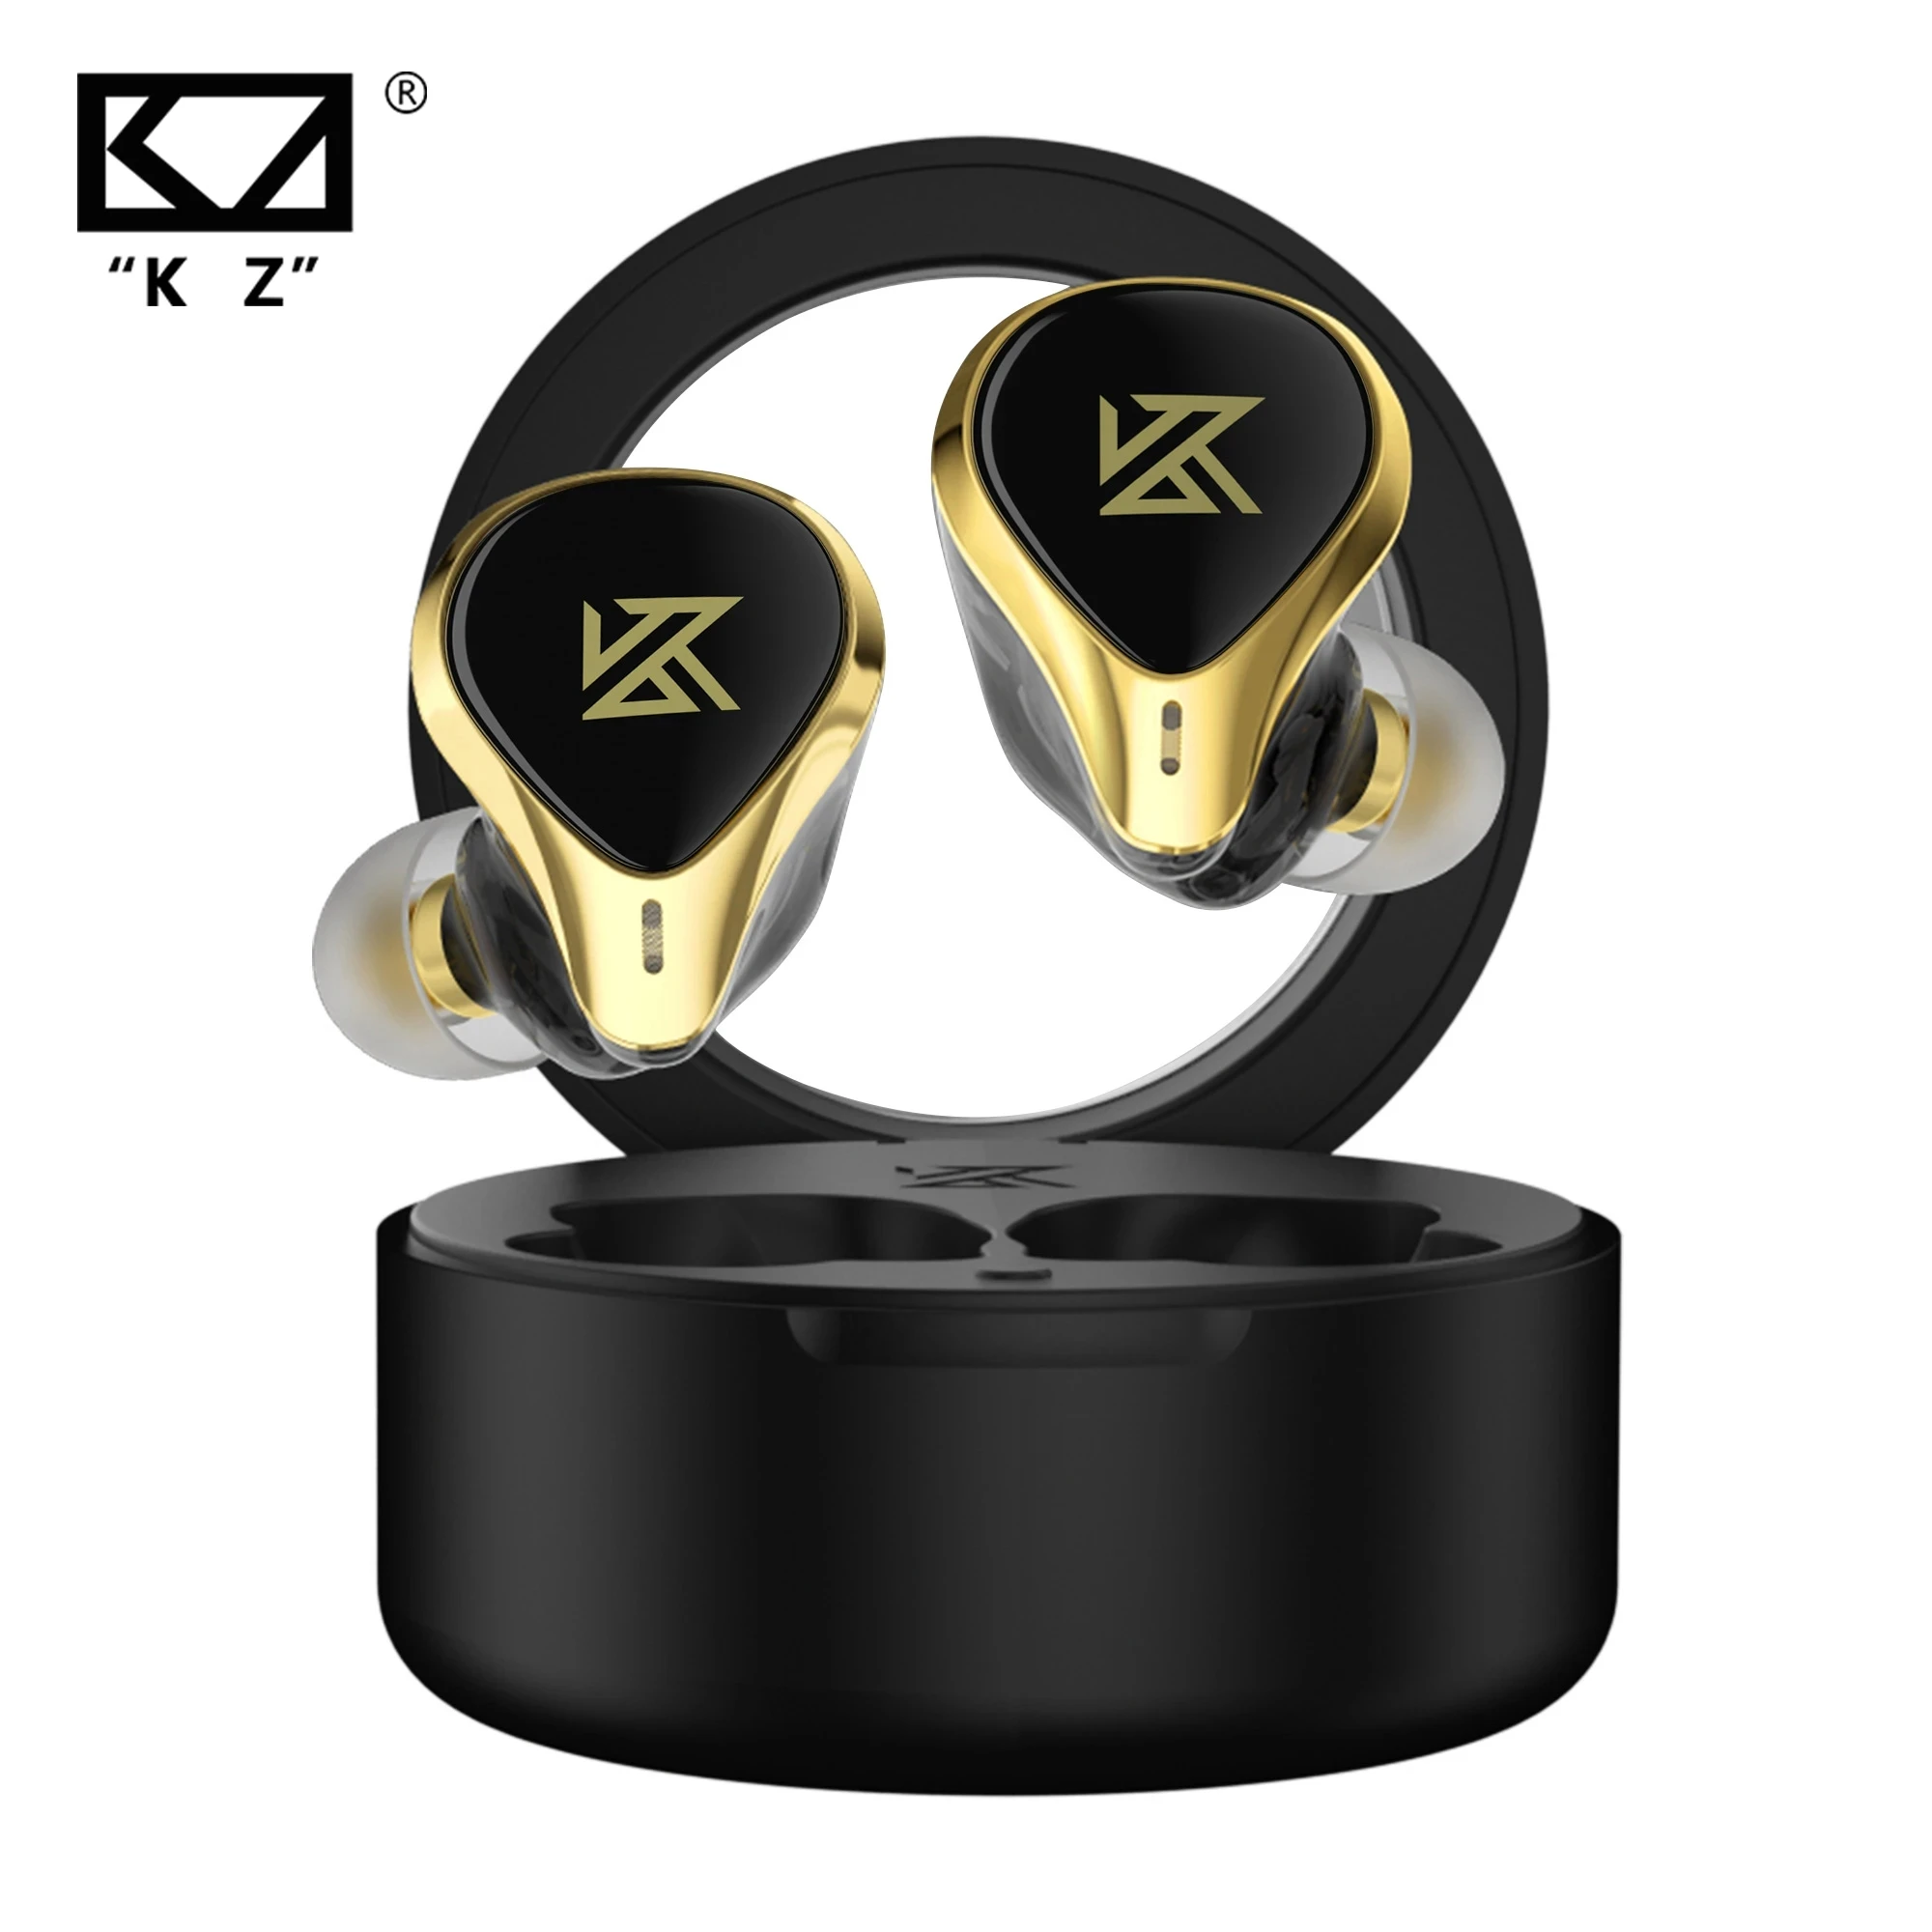 KZ SK10 Pro TWS Earphones Bluetooth-compatible 5.2 Wireless HiFi Game Earbuds Noise Cancelling Sport Monitor Headset KZ SA08 Pro images - 6